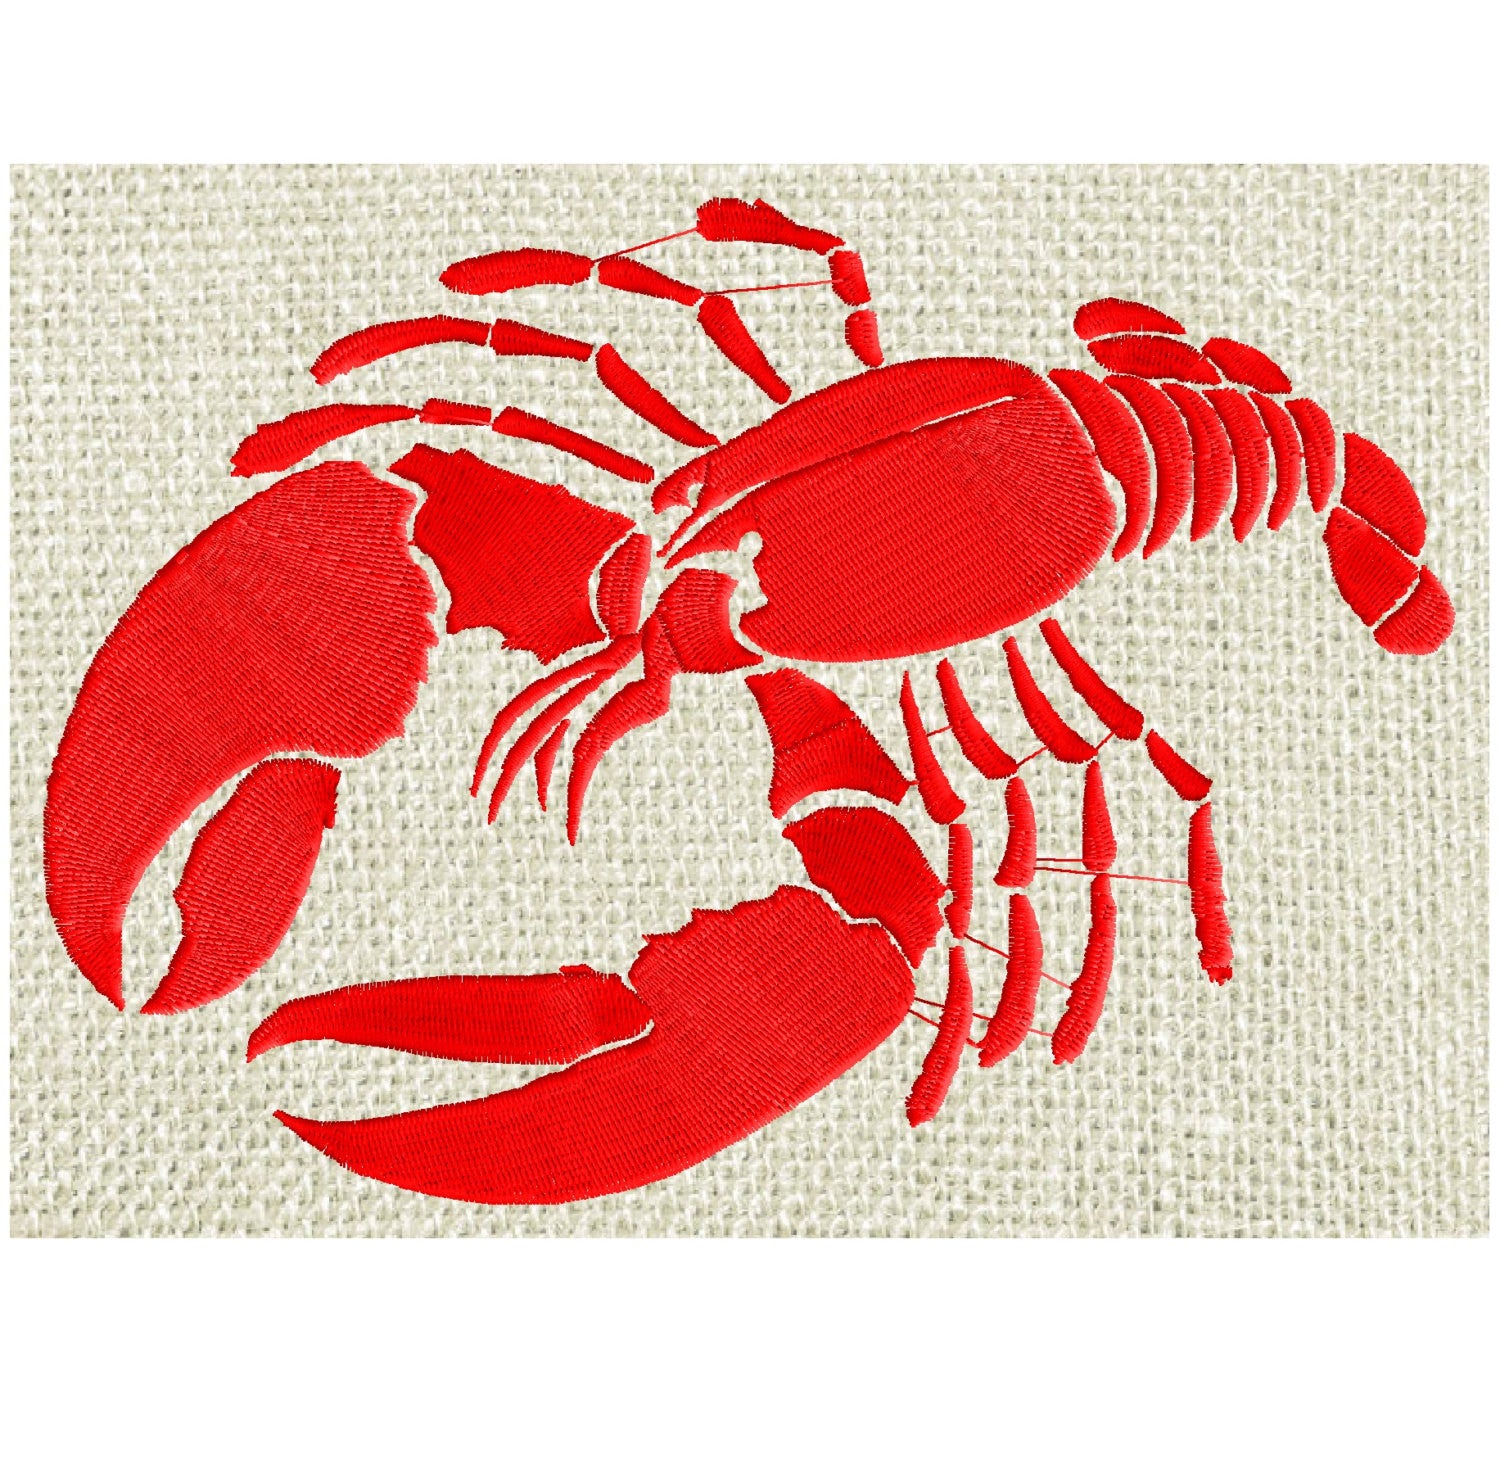 LOBSTER Silhouette - Embroidery Design Embroidery DESIGN FILE - Instant download animals